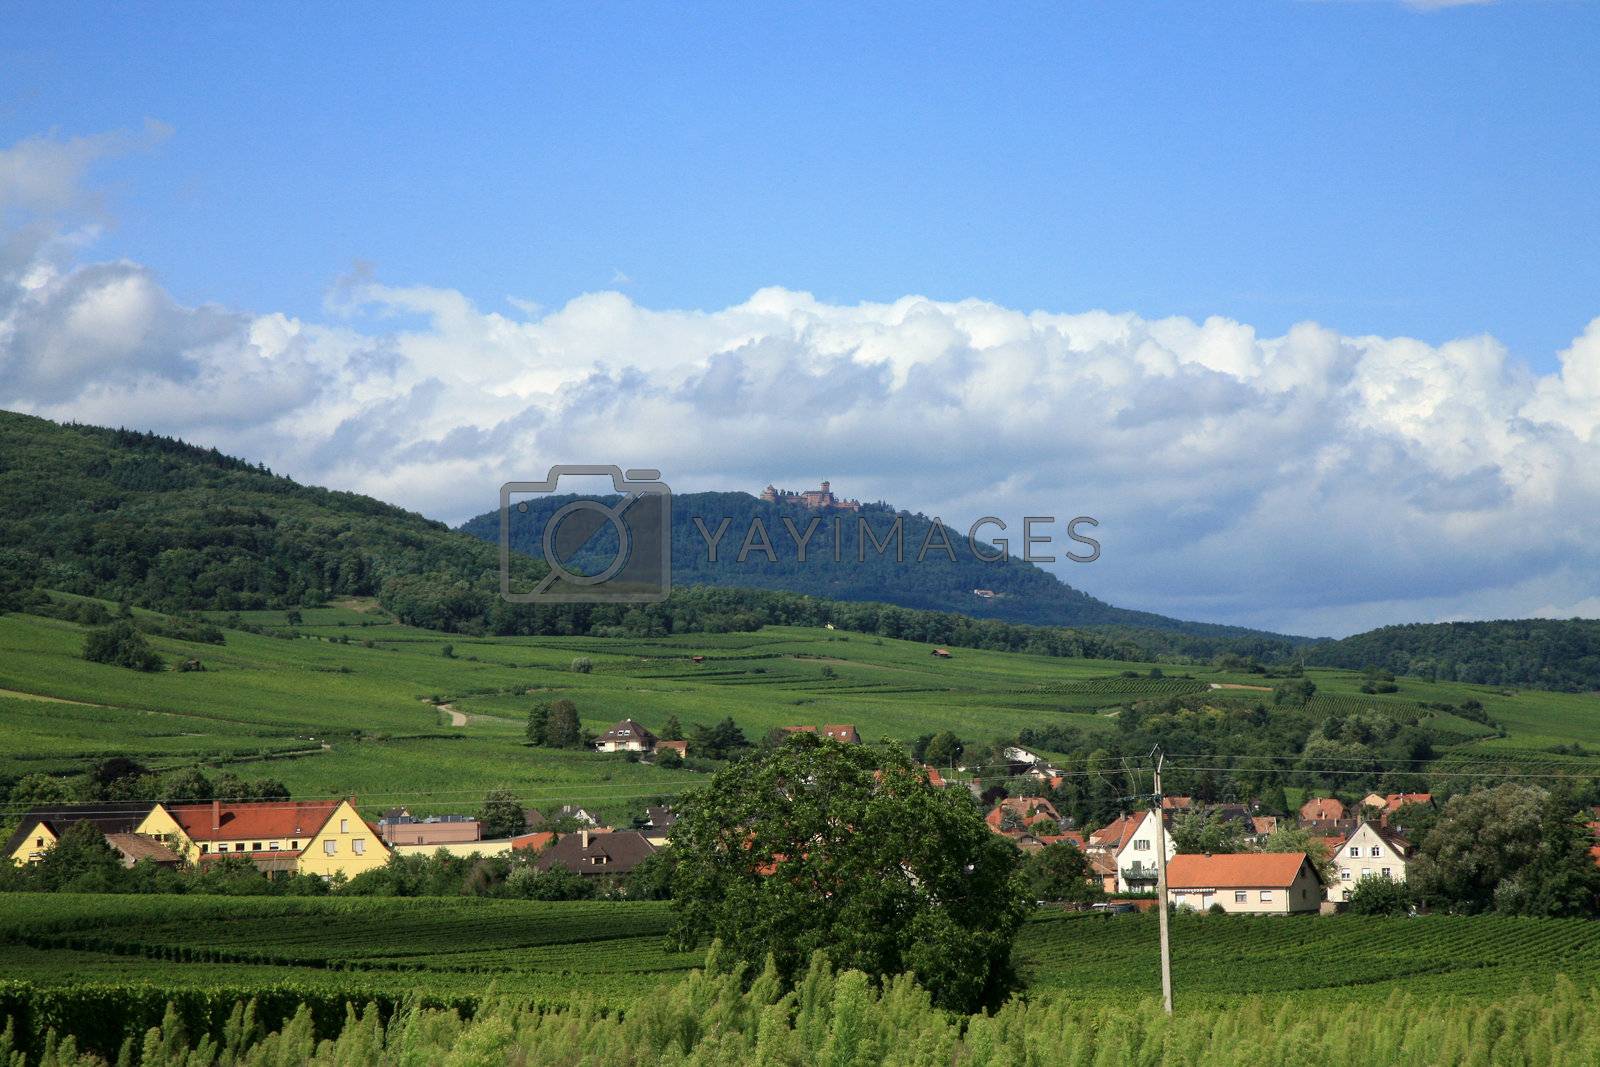 Royalty free image of Route des vines in Alsace - France by fotokate